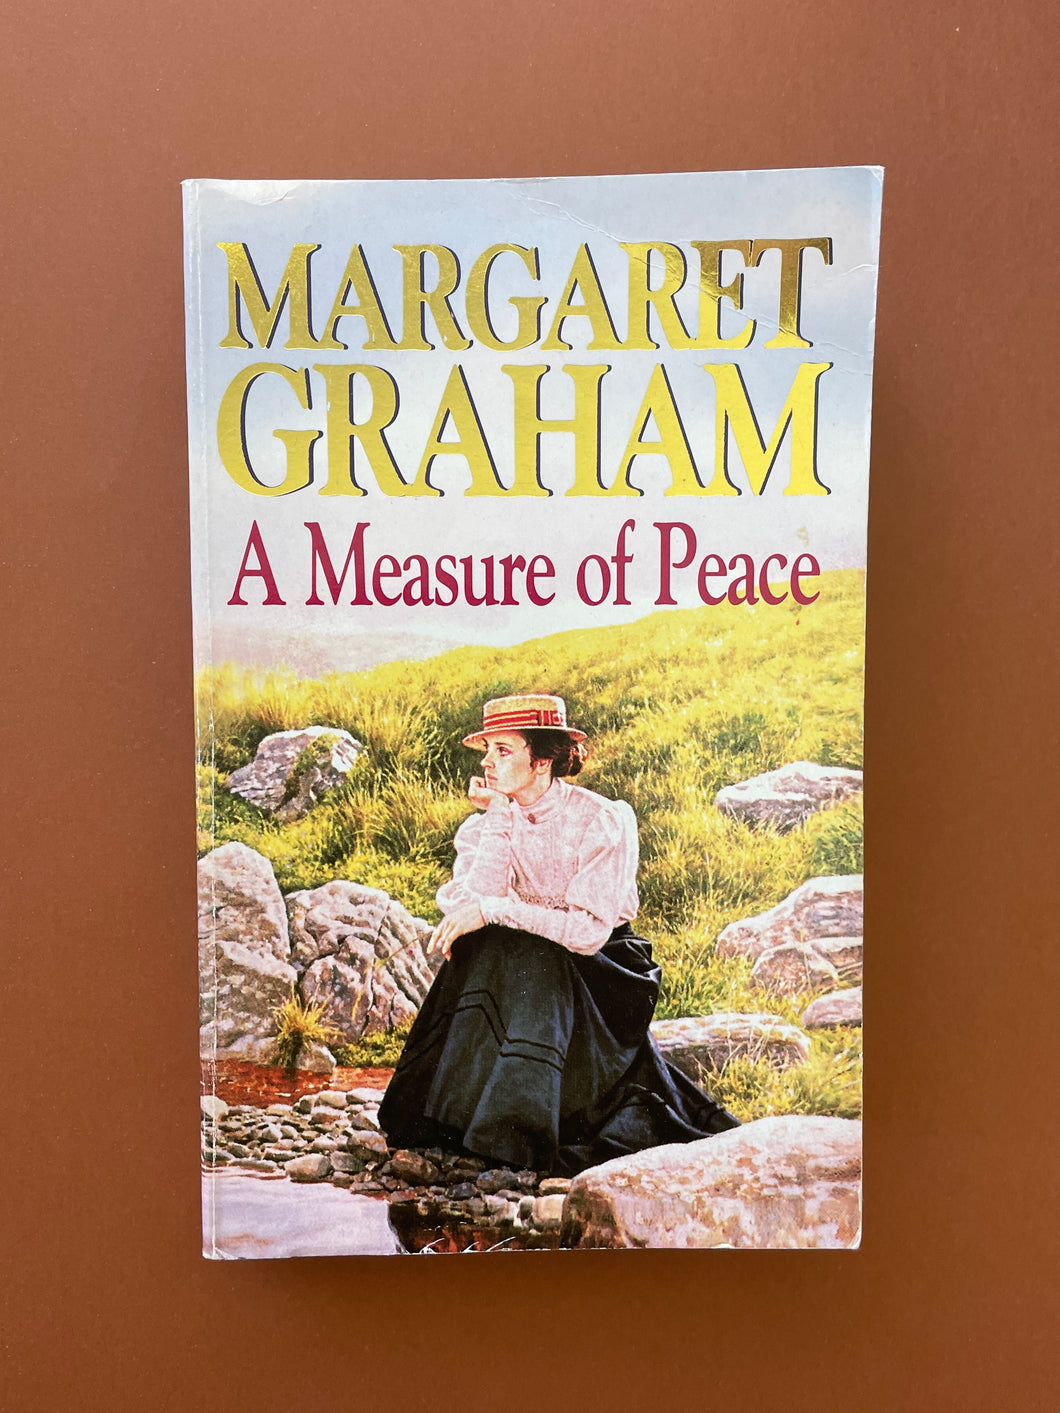 A Measure of Peace by Margaret Graham: photo of the front cover which shows very minor scuff marks along the edges, and an obvious crease on the top-right corner.